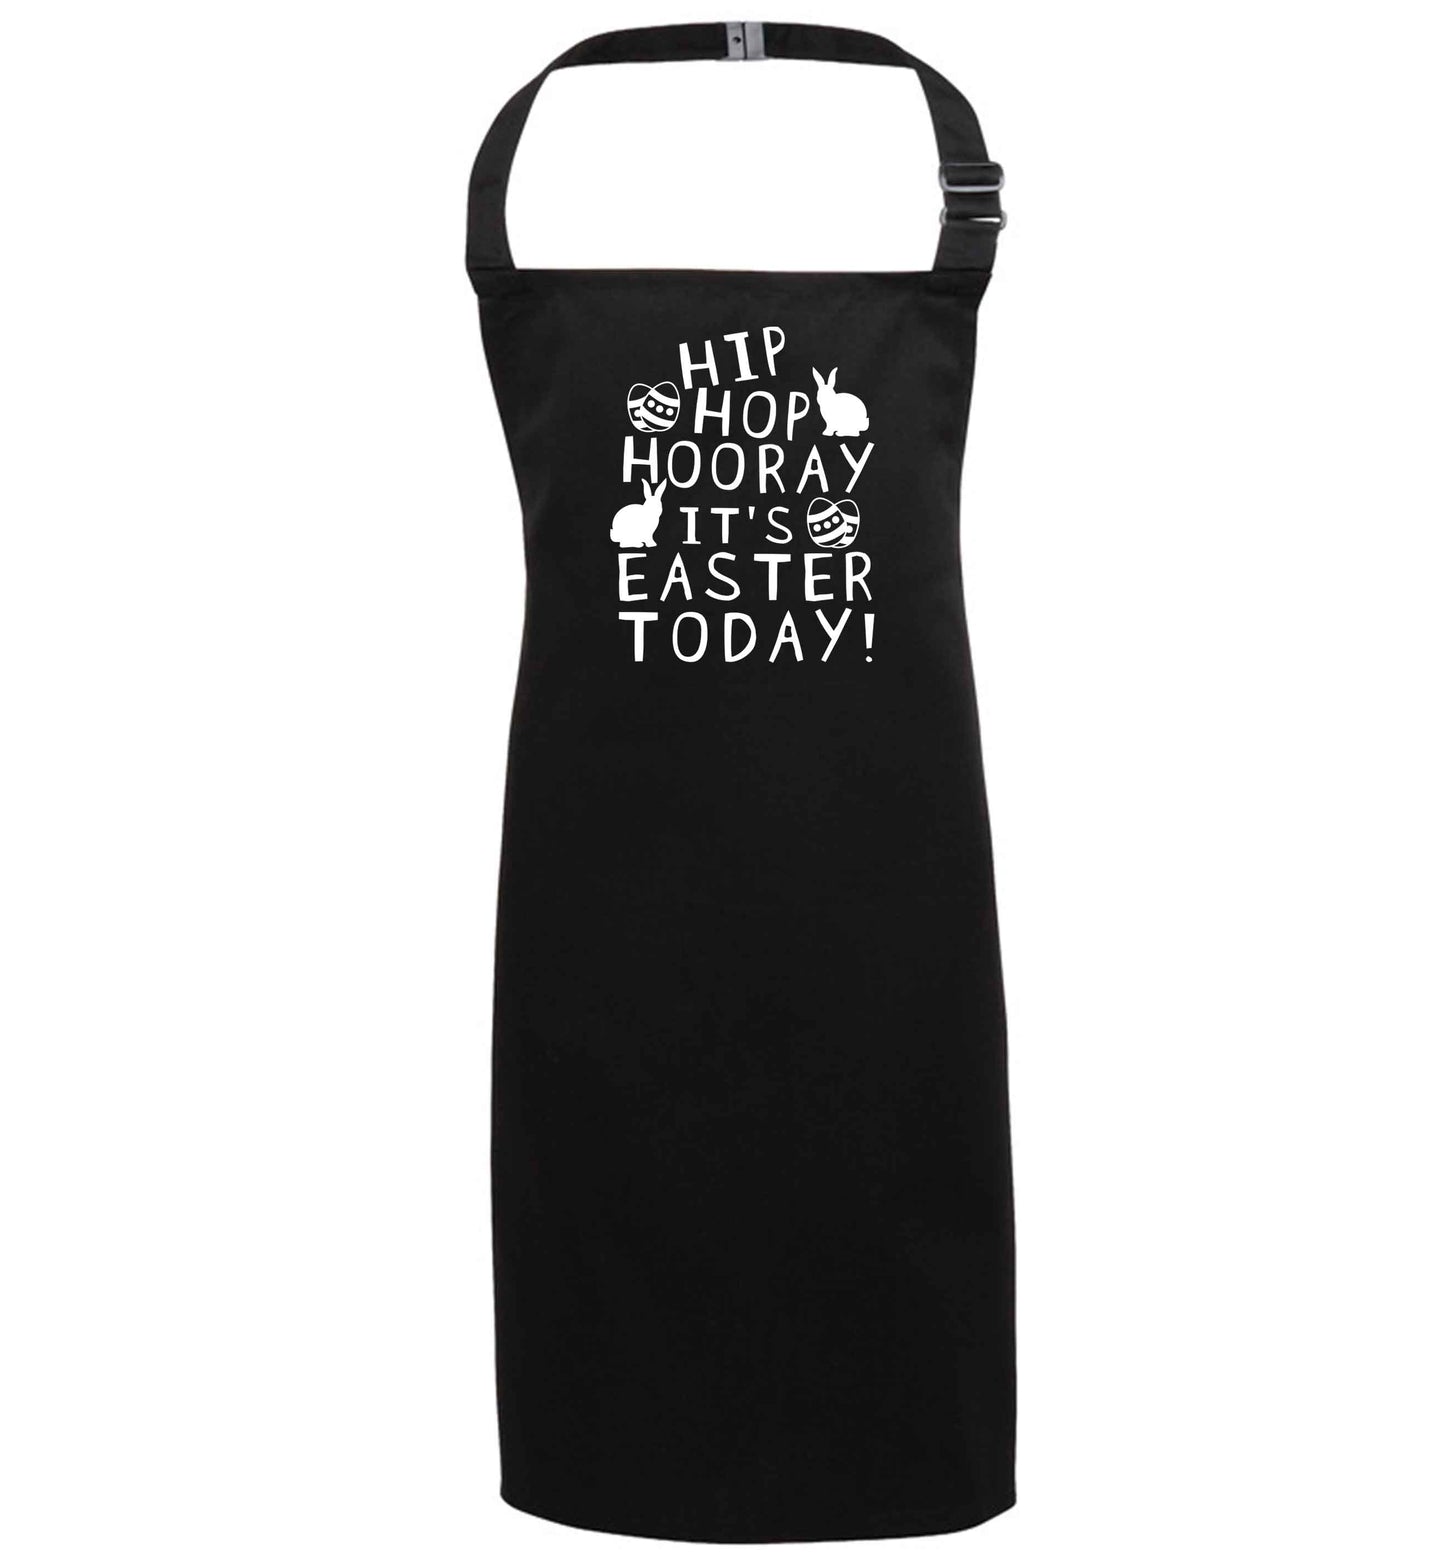 Hip hip hooray it's Easter today! black apron 7-10 years